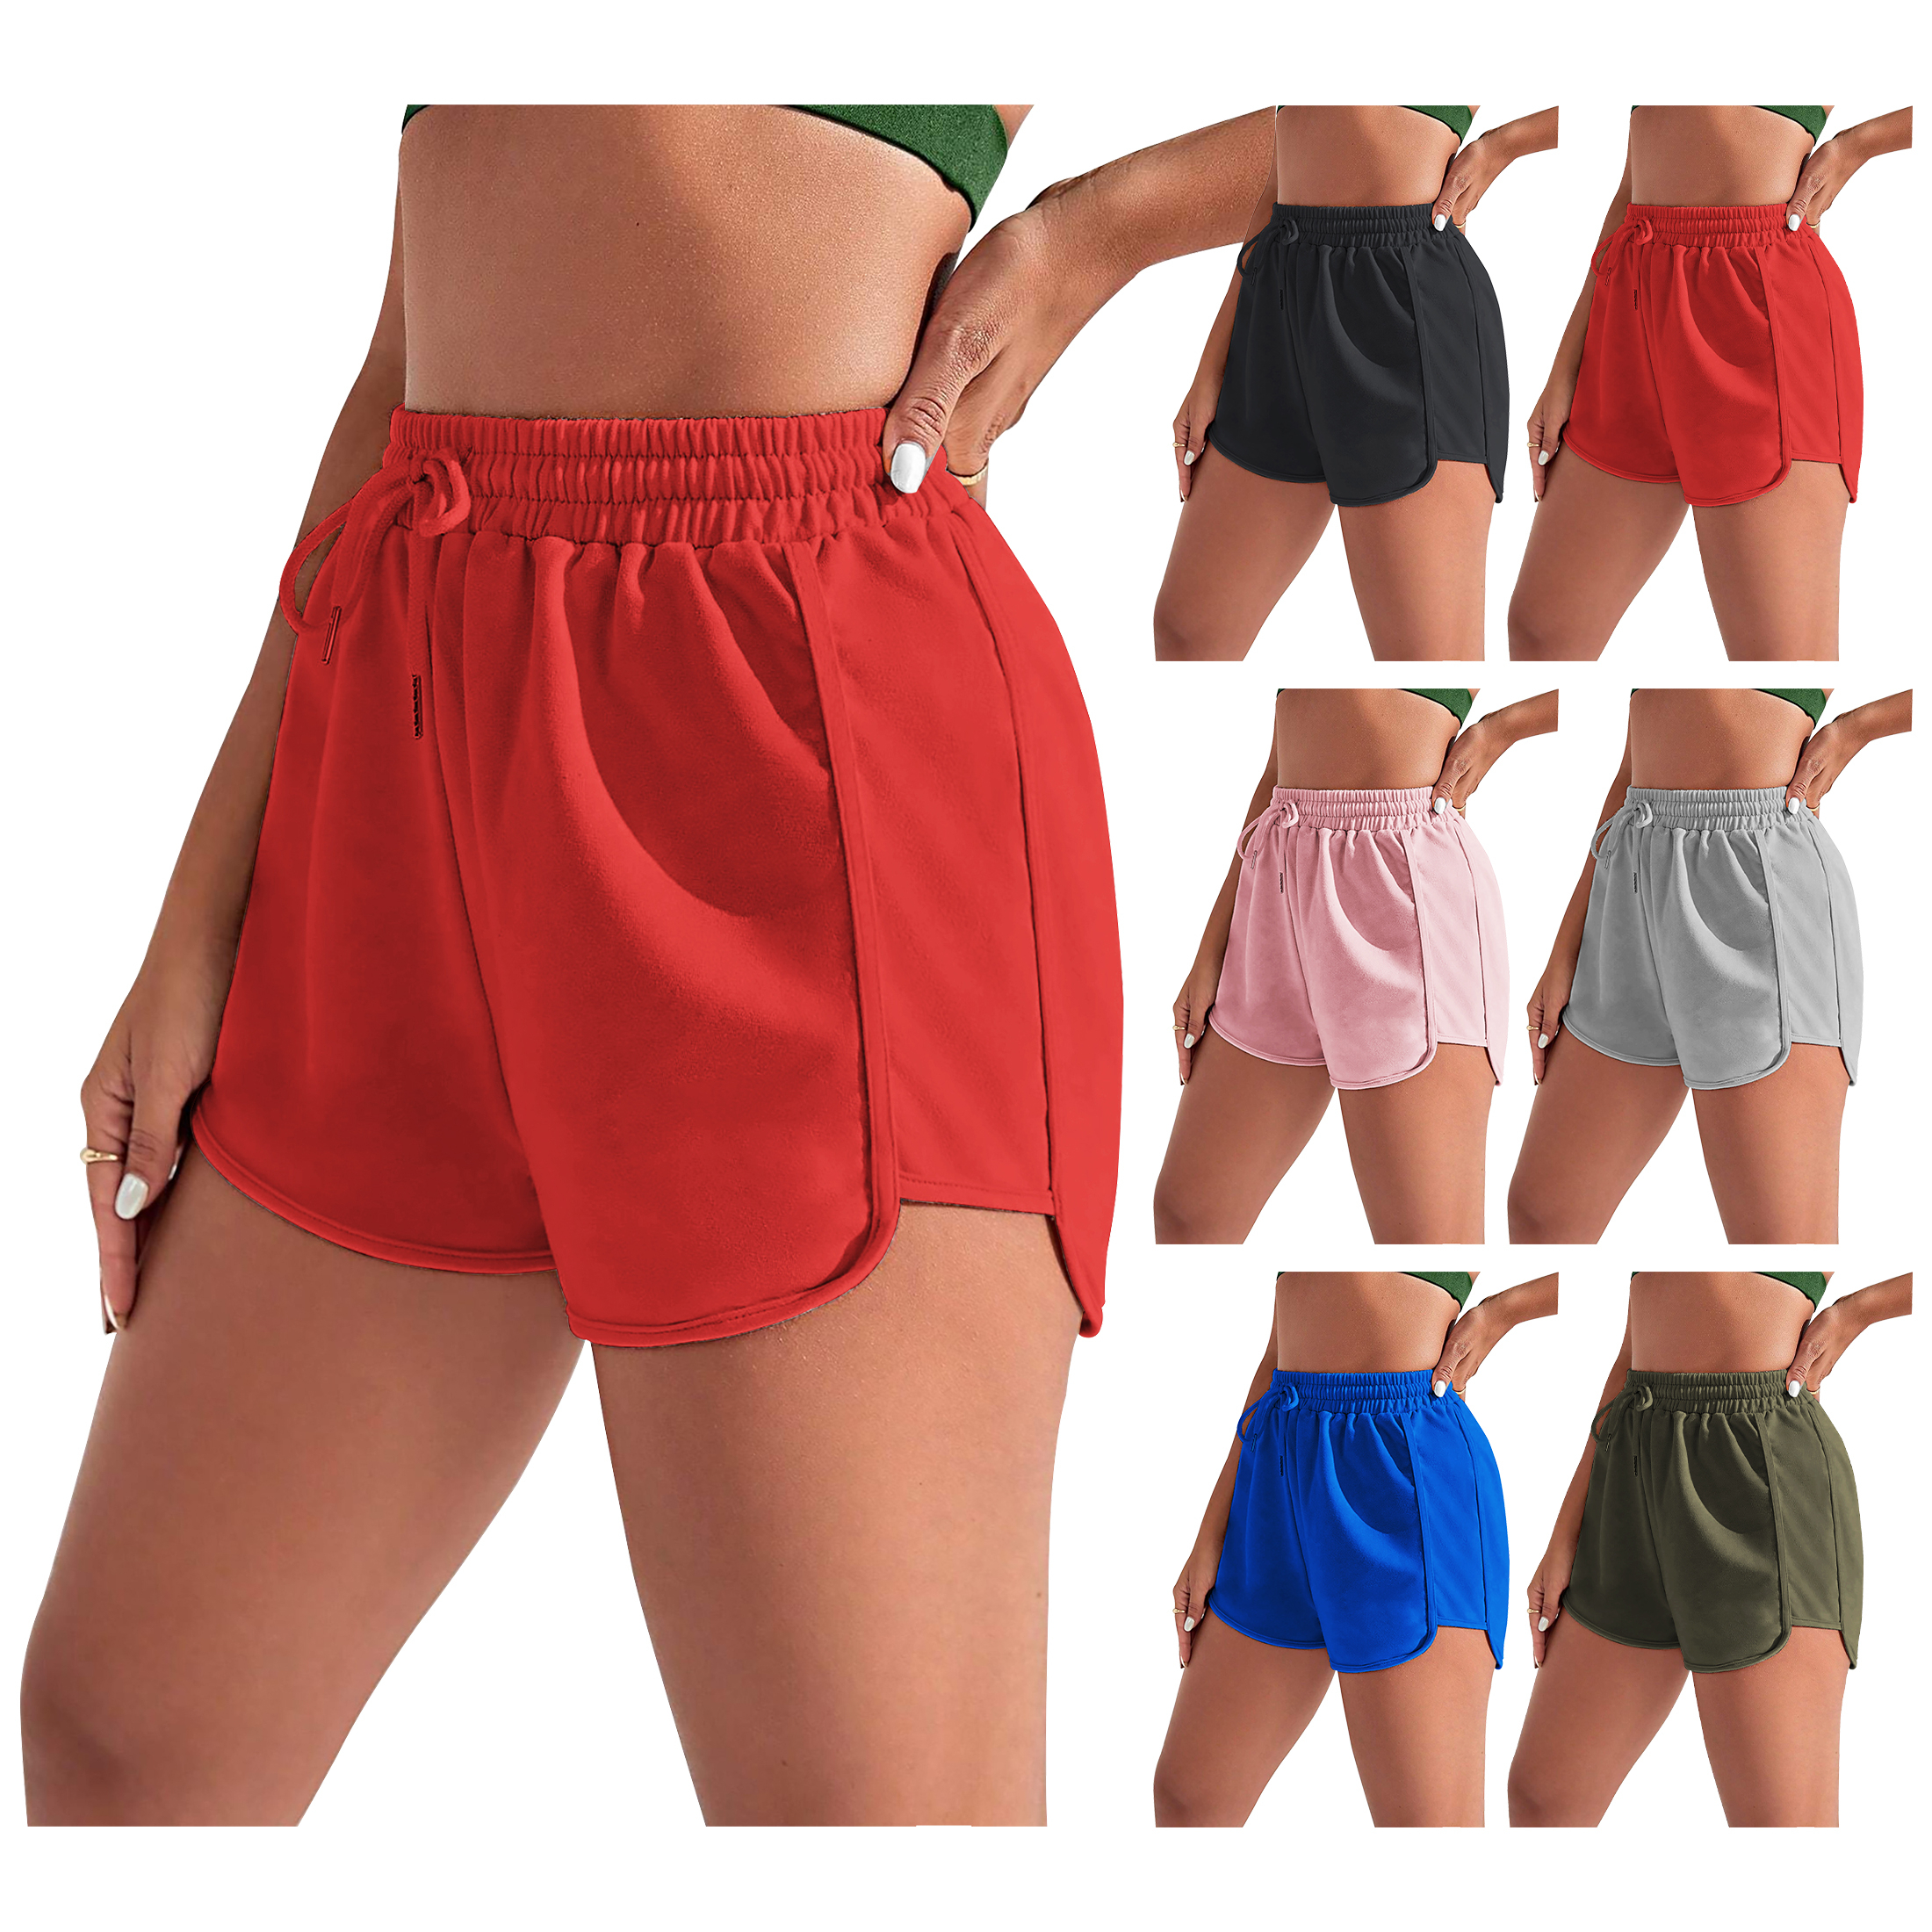 3-Pack Women's High Waist Active Running Shorts Elastic Sporty Workout Bottoms Quick Dry Athletic Performance Moisture-Wicking Gym Shorts -